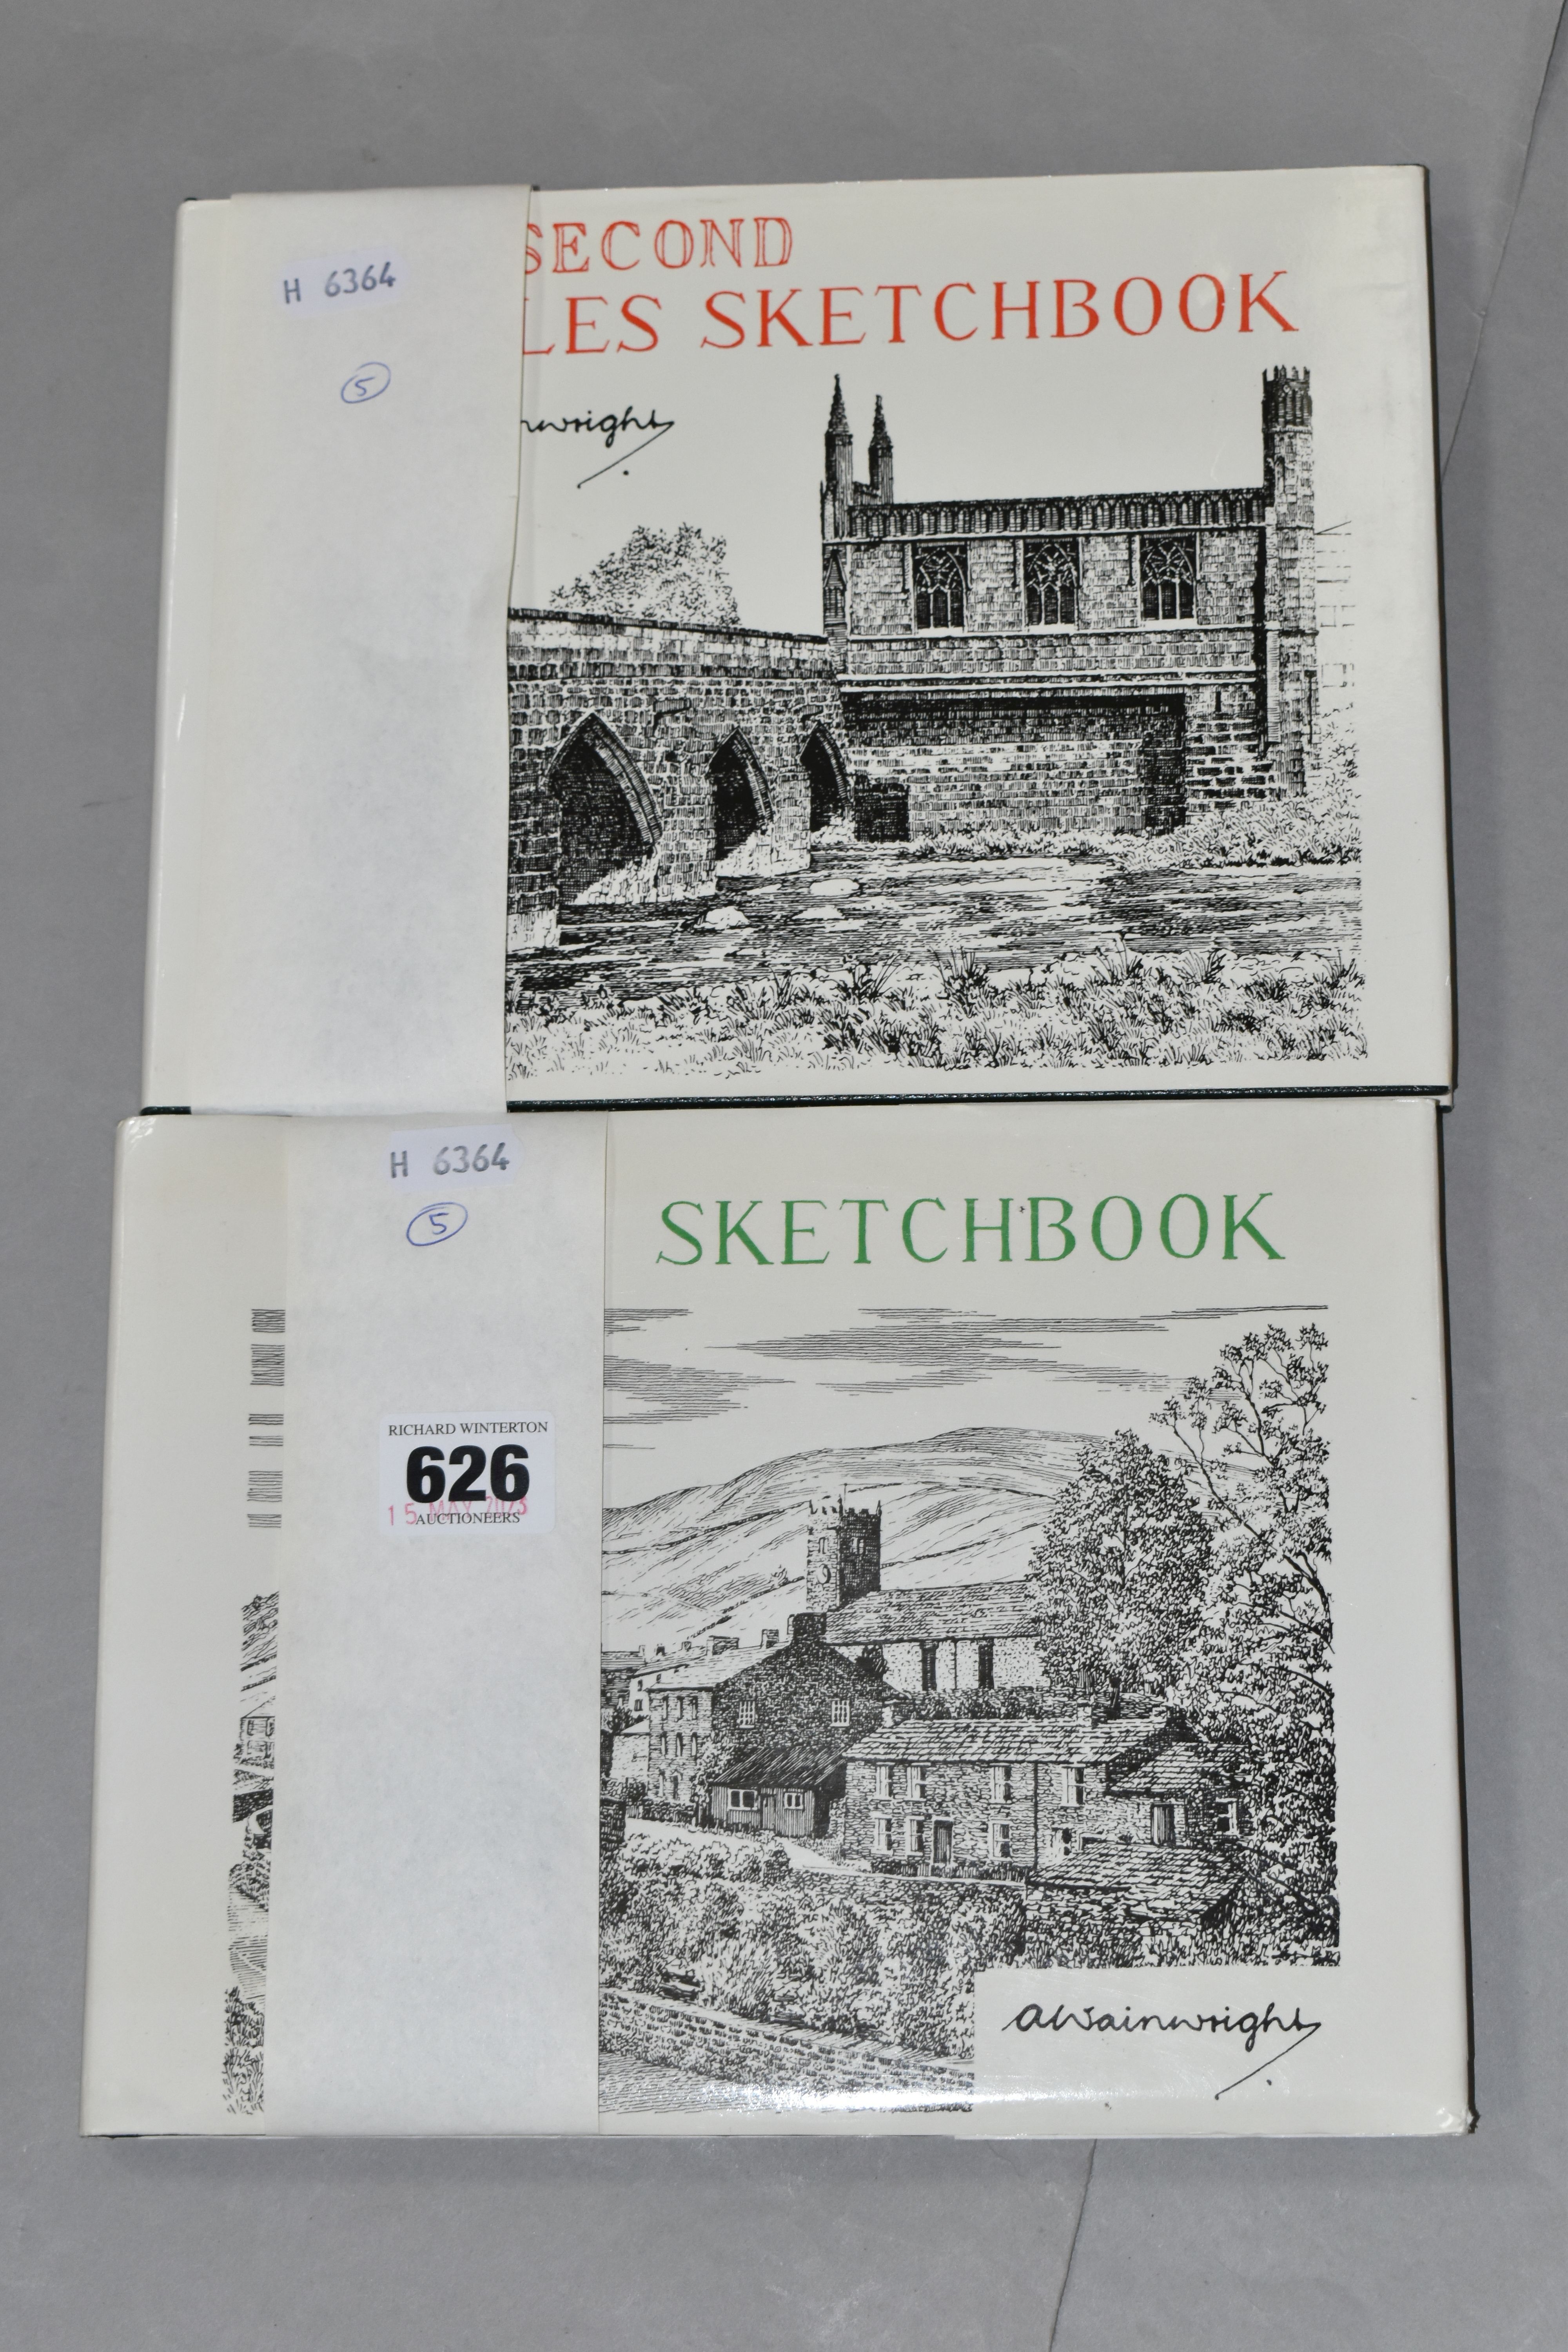 ALFRED WAINWRIGHT - TWO BOOKS, later editions of A dales Sketchbook and A Second Dales Sketchbook,